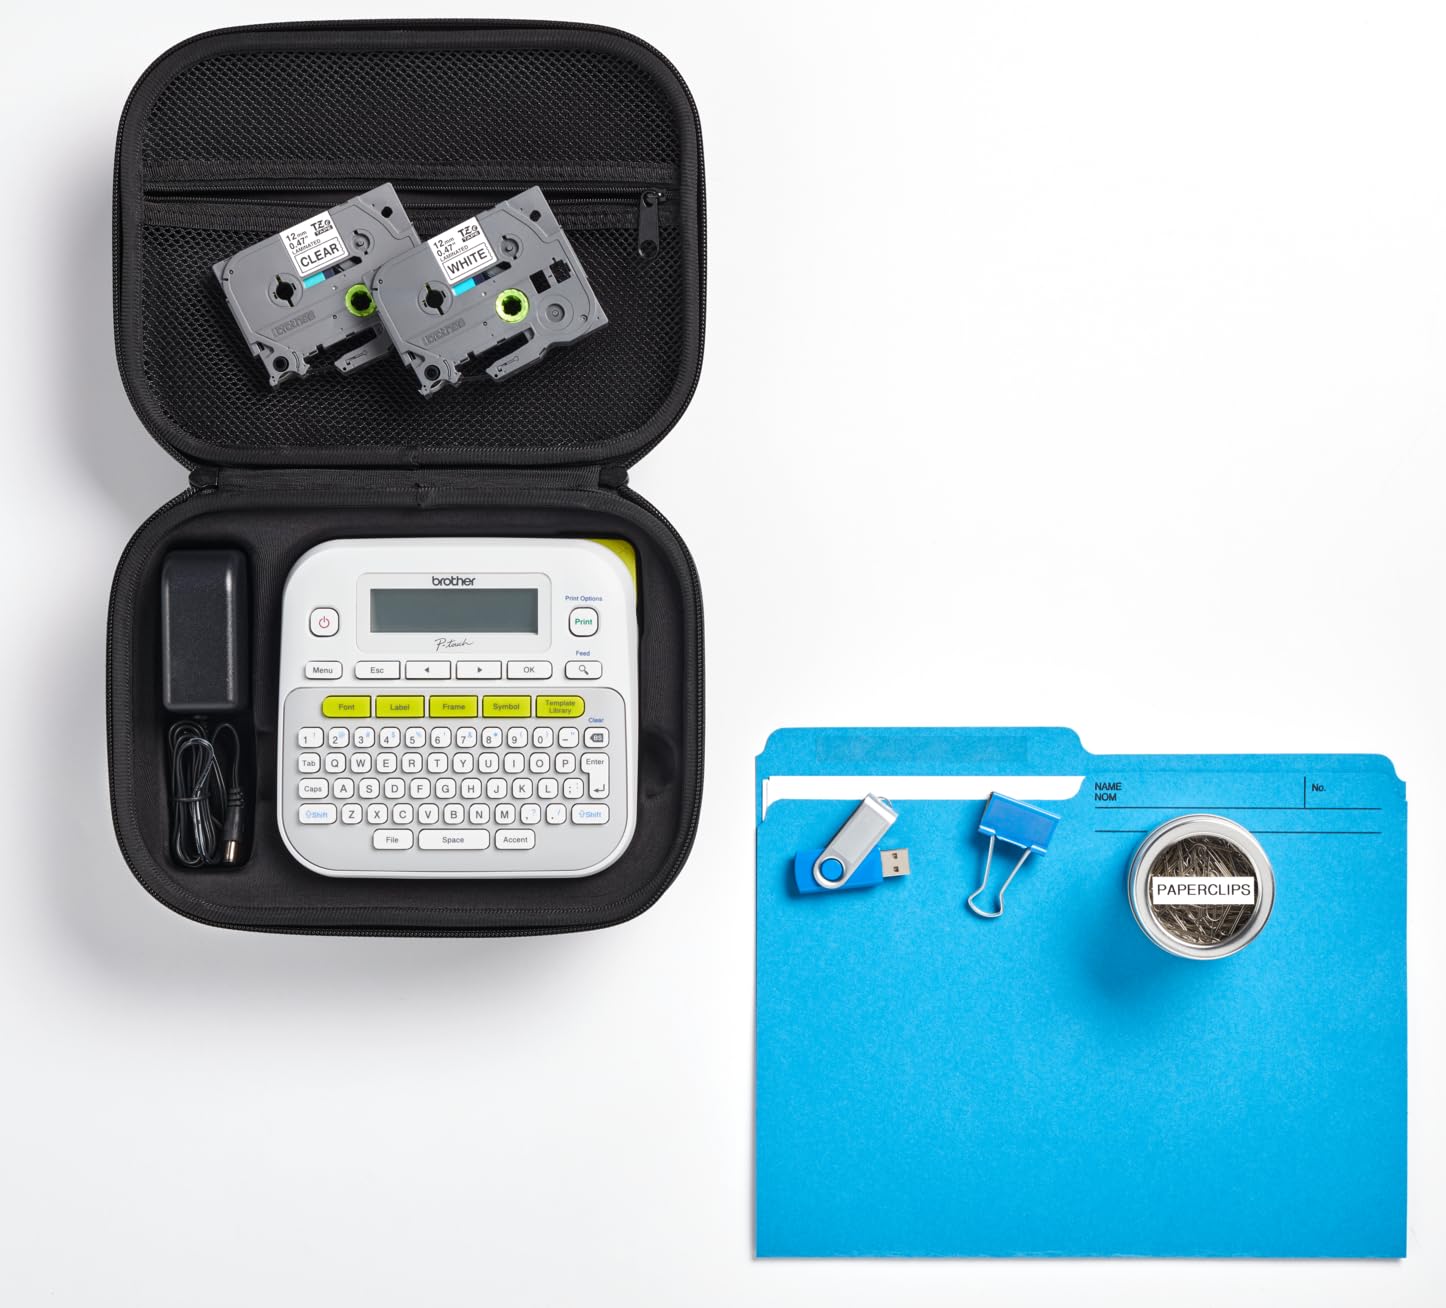 Brother PT-D210SV Label Maker Bonus Bundle Comes with a Protective Carrying case, an Adapter, and Two Sample Genuine TZe Label Tapes for Added Value.